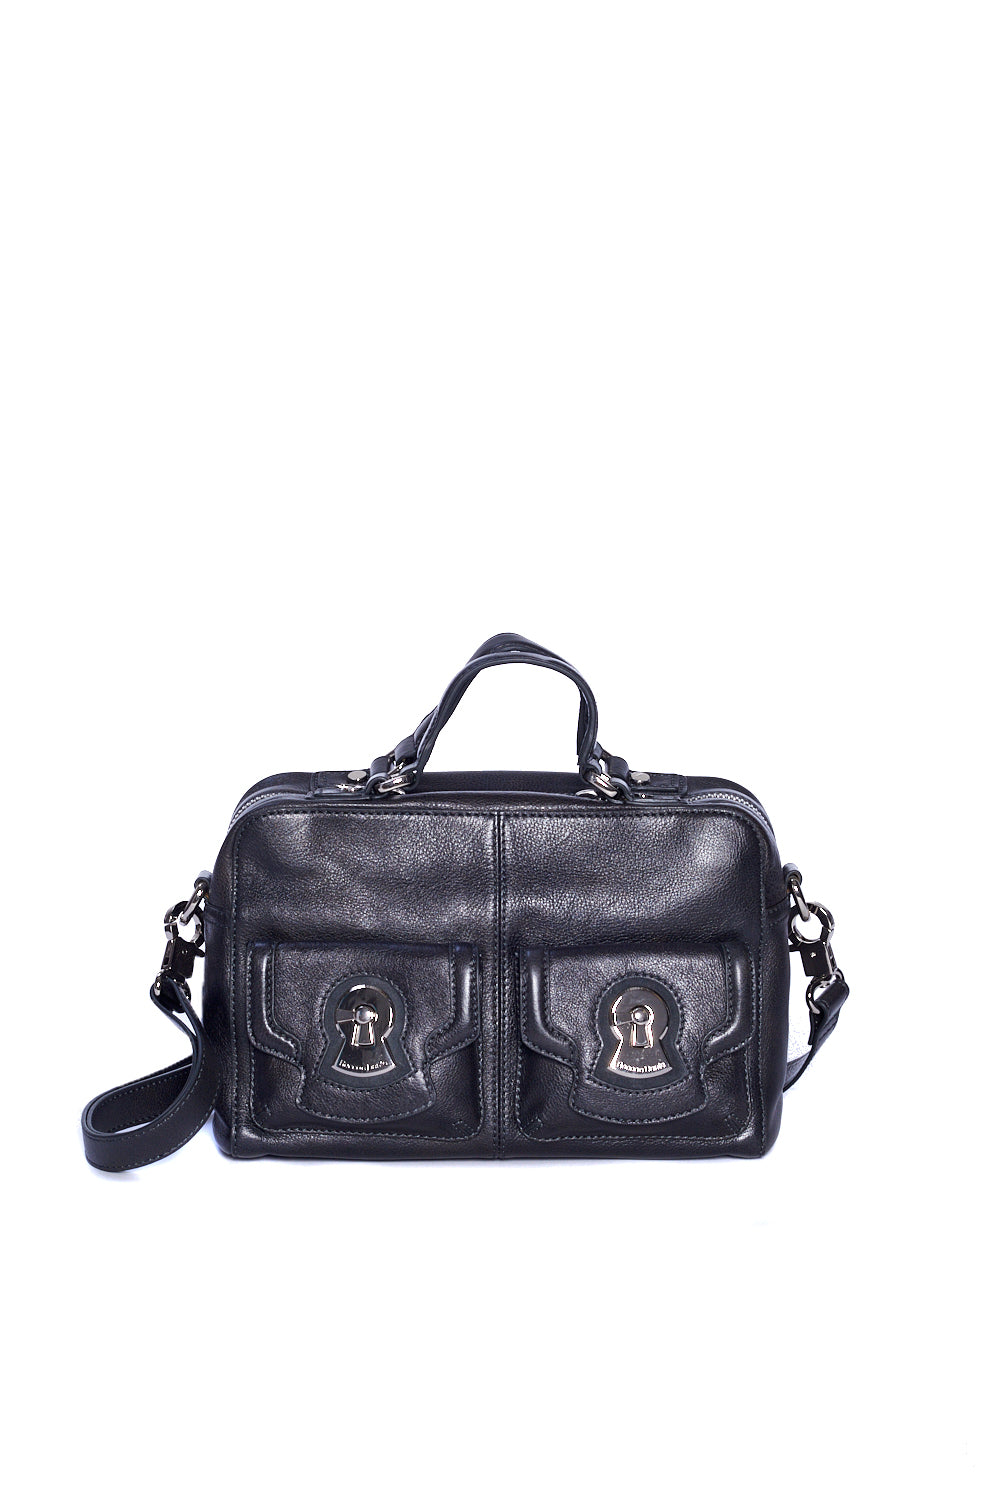 Dark Blue Leather Top Handle Work Satchel Bag with Removable Strap